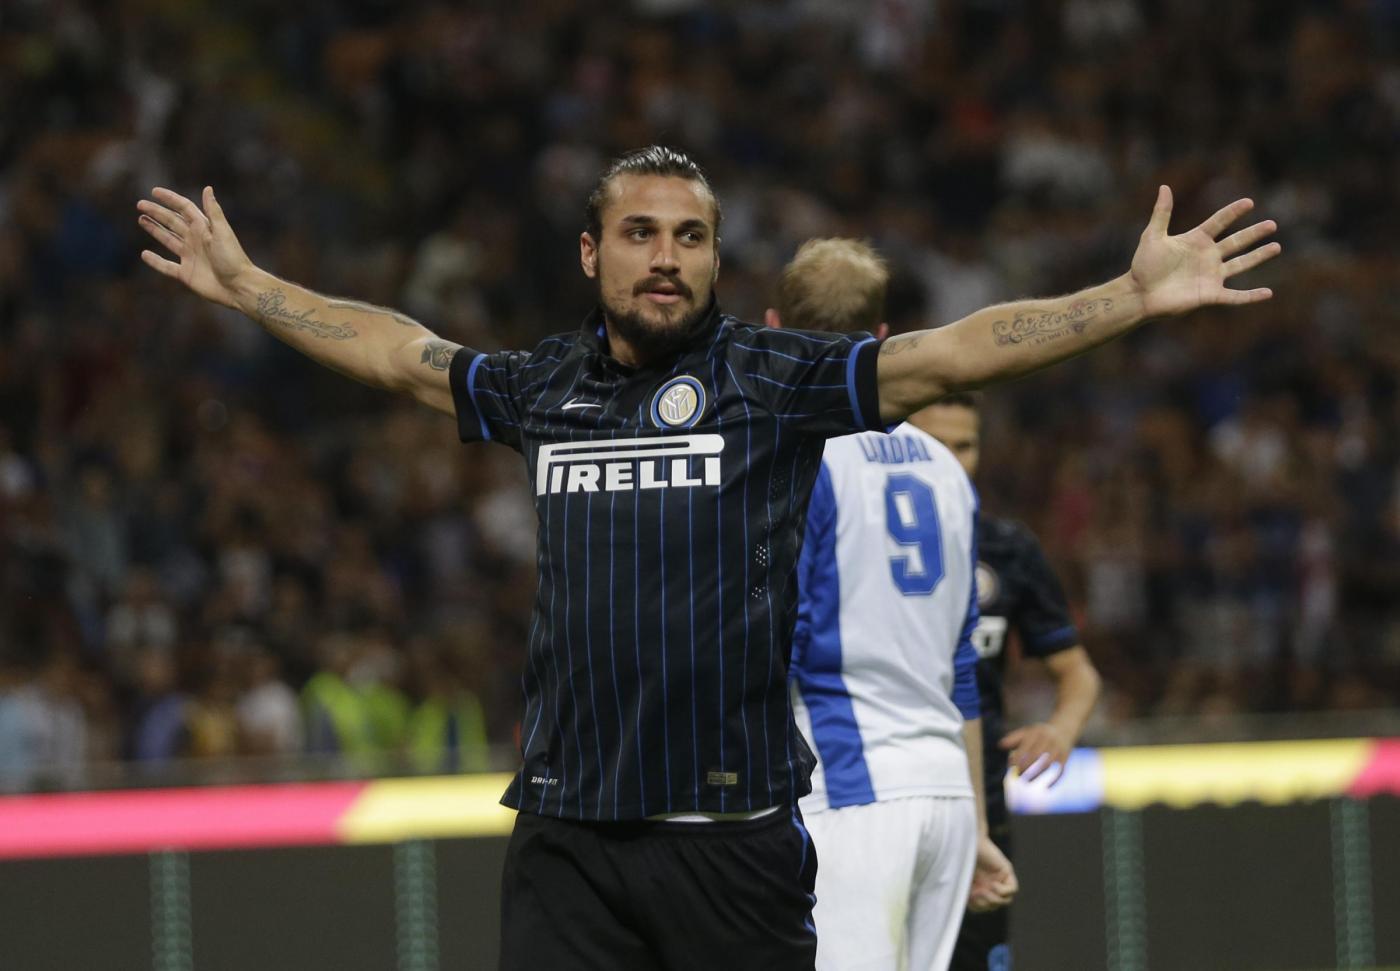 Ex-Inter Striker Daniel Osvaldo: “If Guarin Wasn’t There I Would’ve Punched Mauro Icardi”